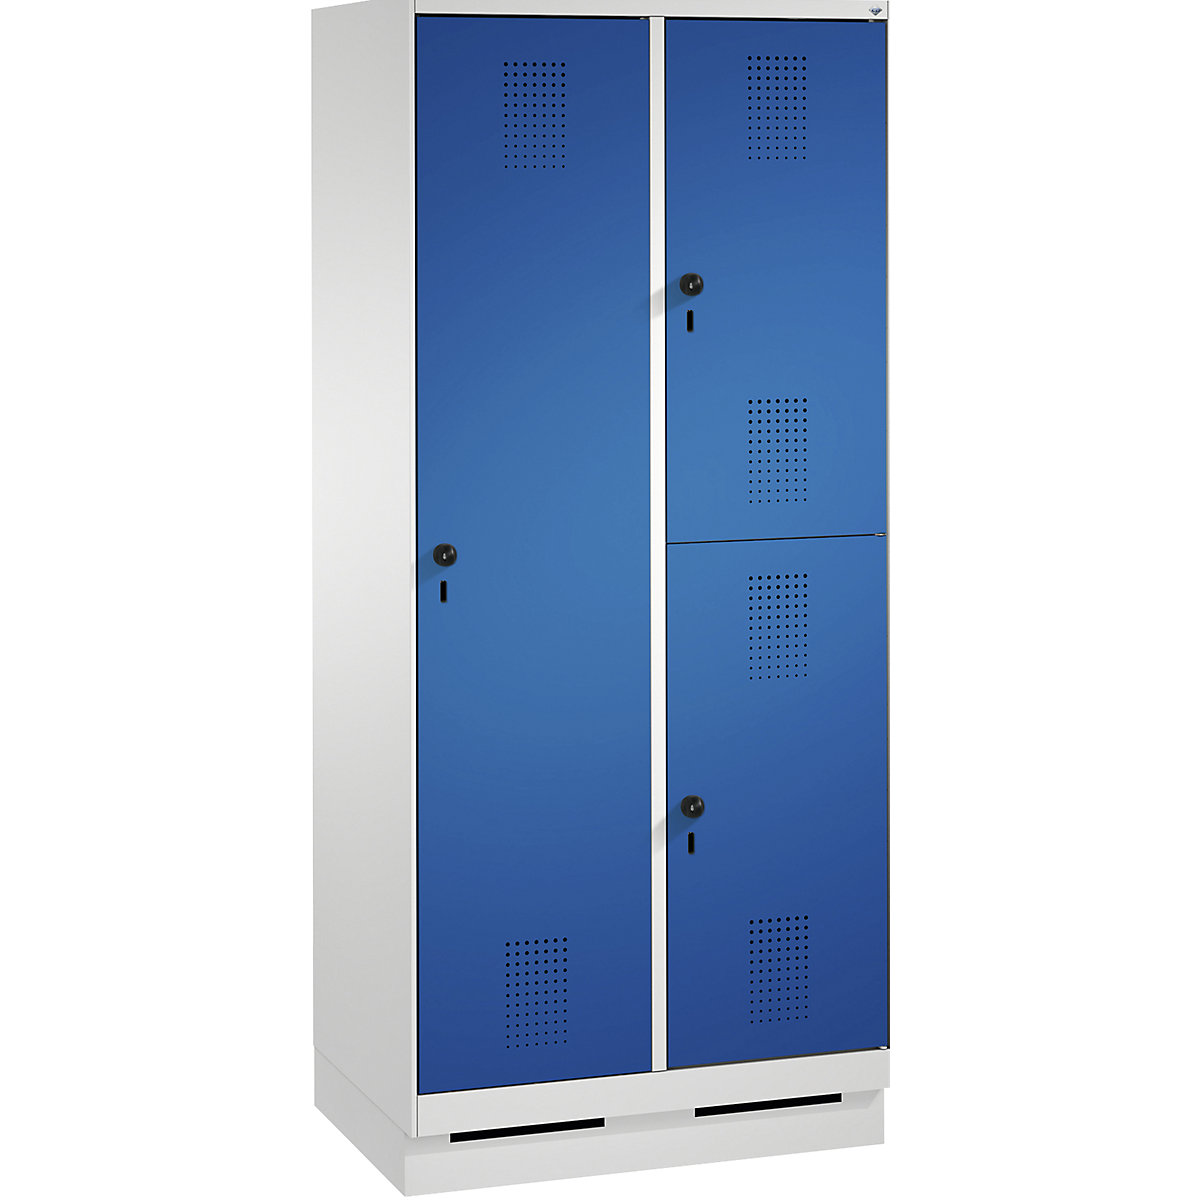 EVOLO combination cupboard, single and double tier – C+P, 2 compartments, 3 doors, compartment width 400 mm, with plinth, light grey / gentian blue